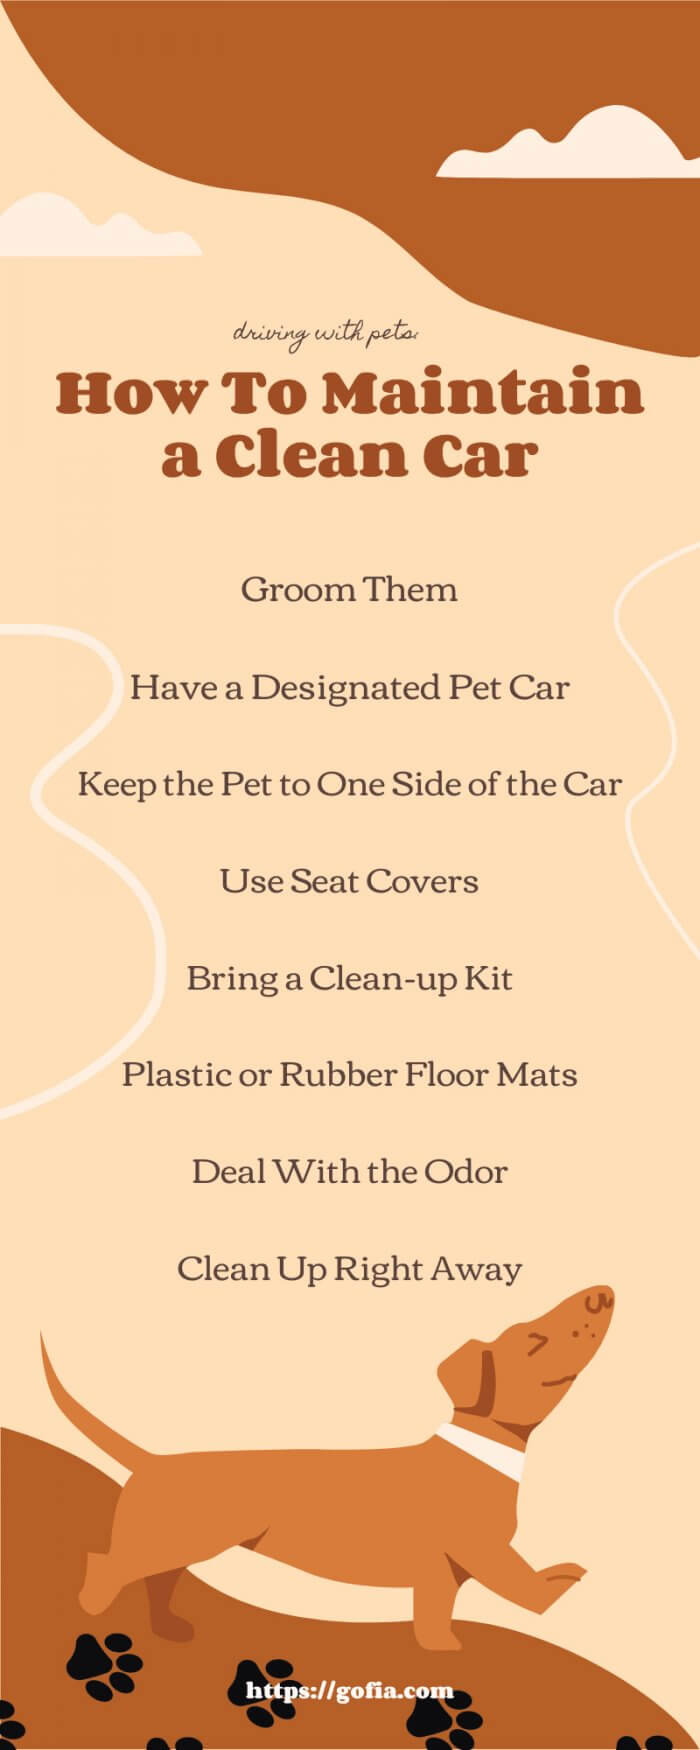 Driving With Pets: How To Maintain a Clean Car